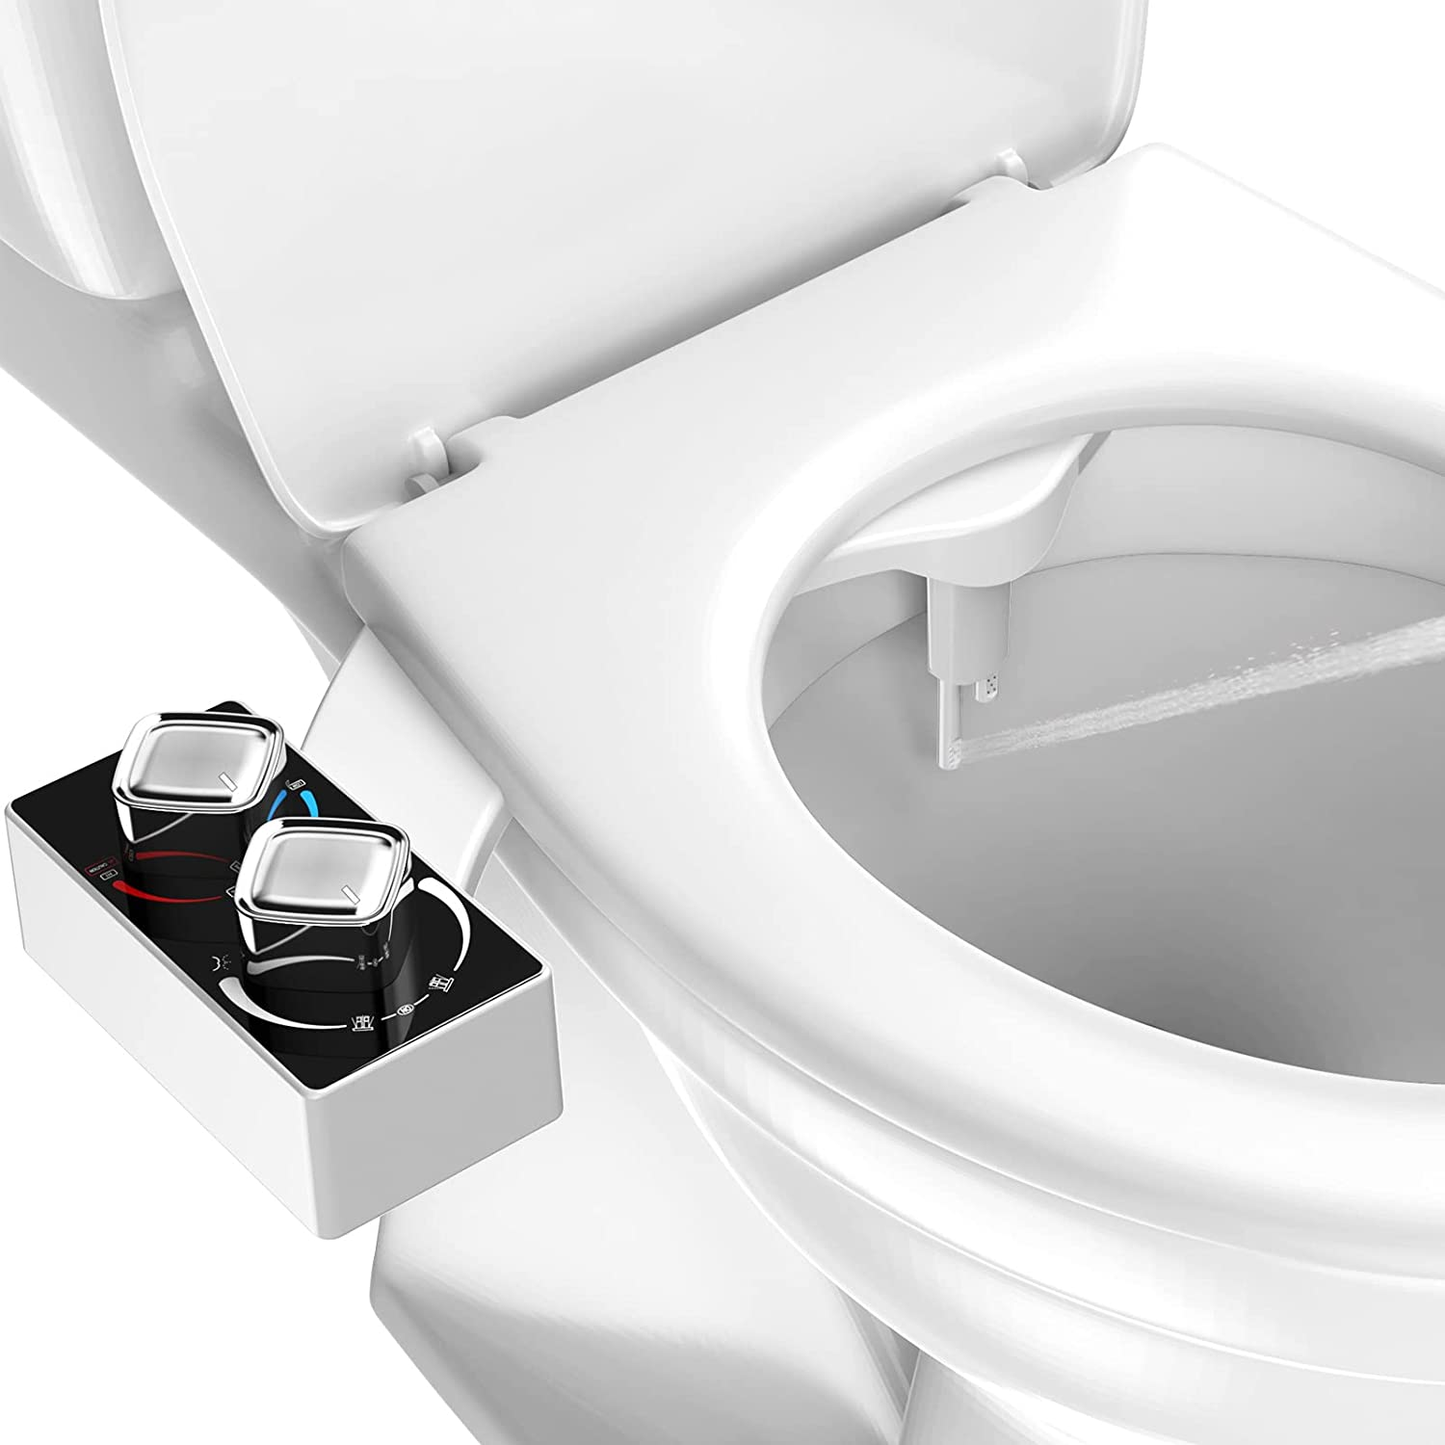 Toilet Seat-Bidet Attachments-Non Electric-Dual Nozzle - Hot and Cold Water Bidet with Adjustable Water Spray for Sanitary and Feminine